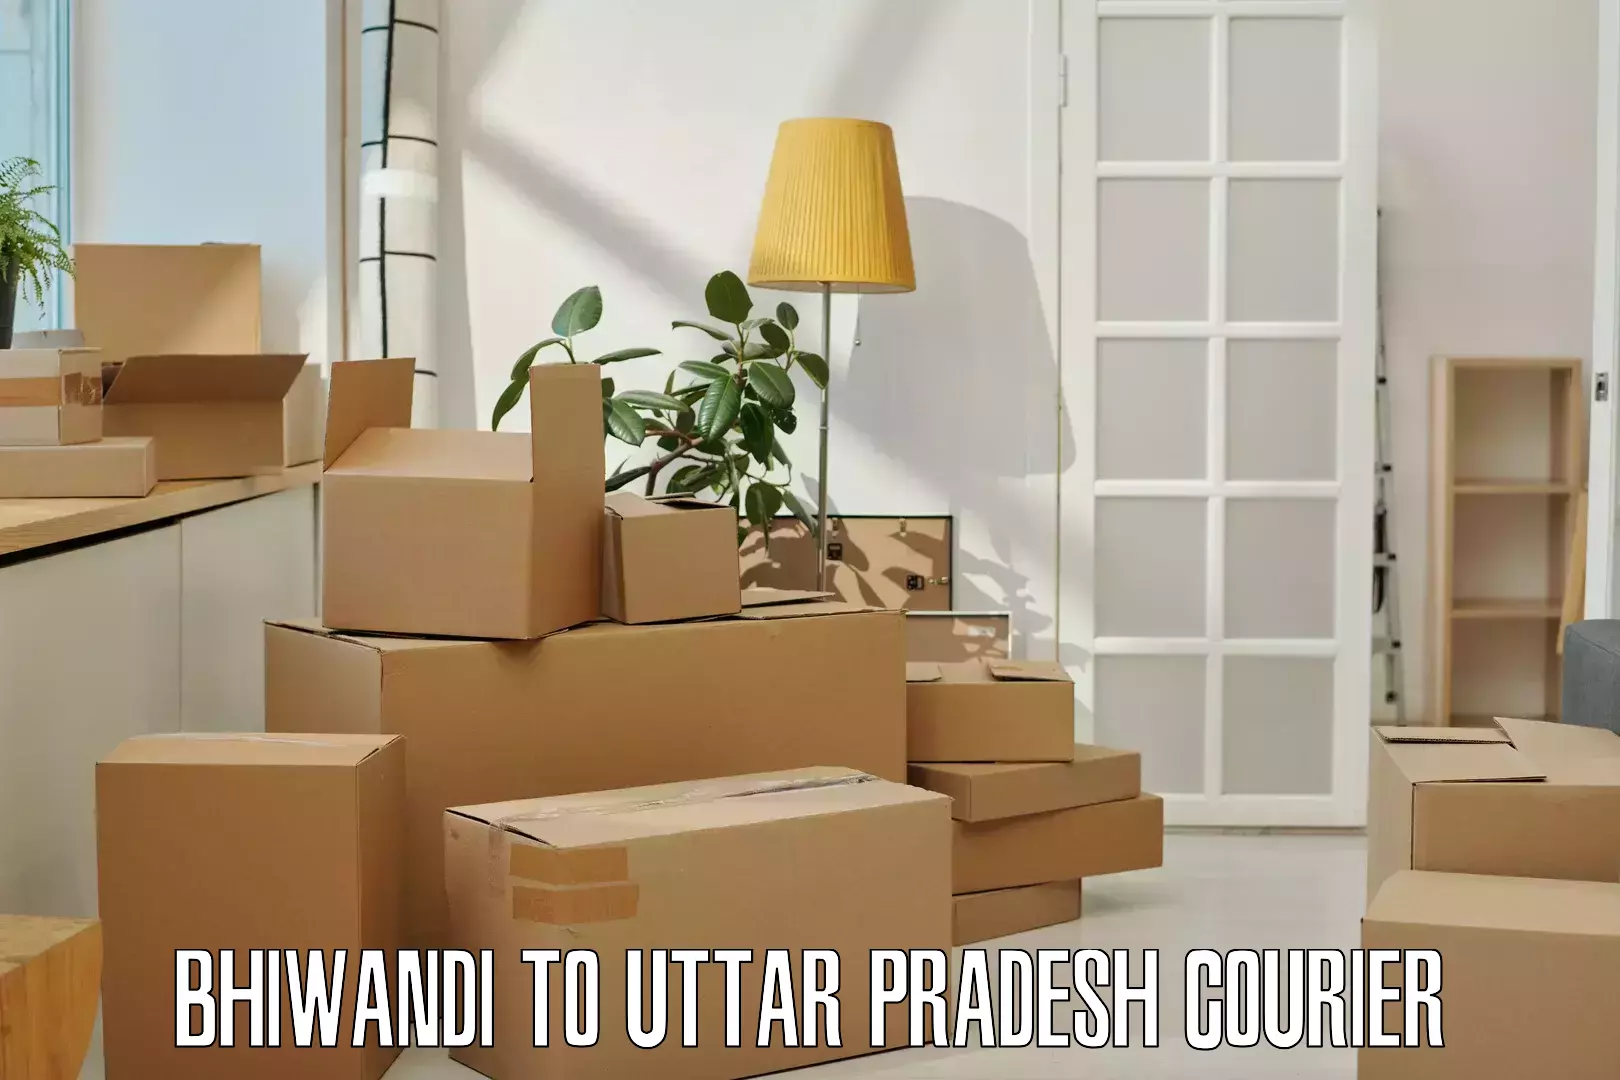 Advanced shipping network Bhiwandi to Lucknow